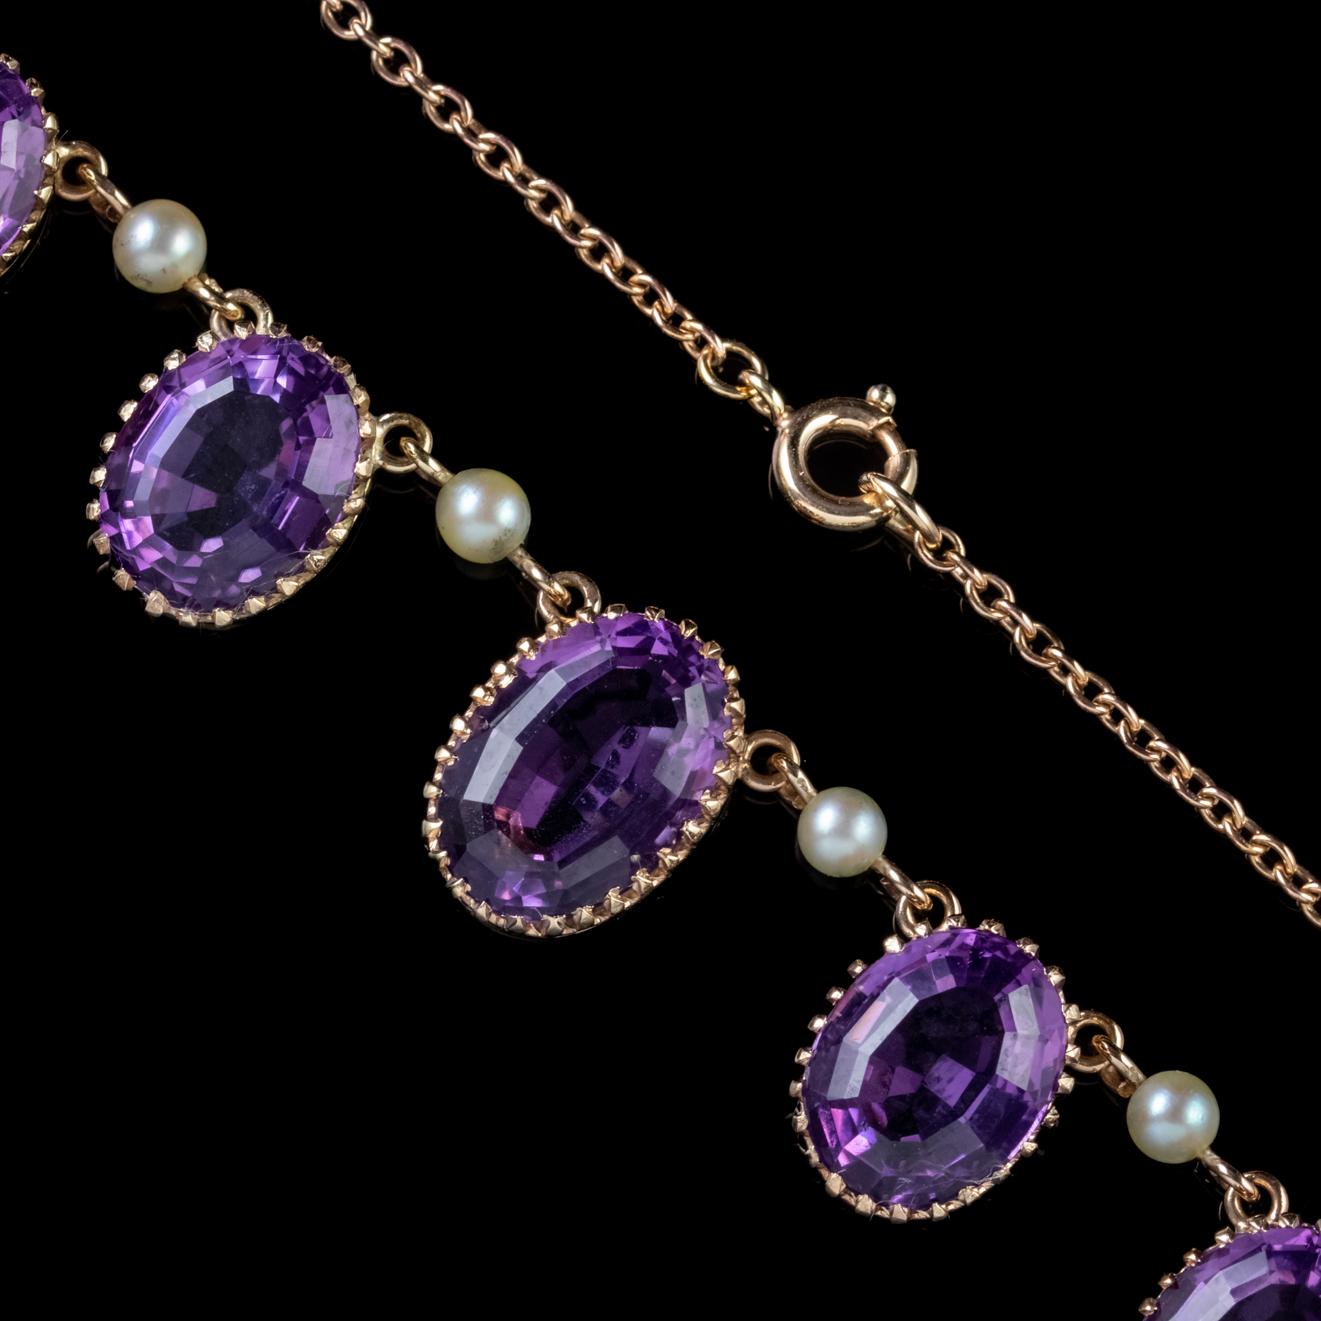 Antique Victorian Amethyst Pearl Garland Necklace 9 Carat Gold, circa 1900 For Sale 1